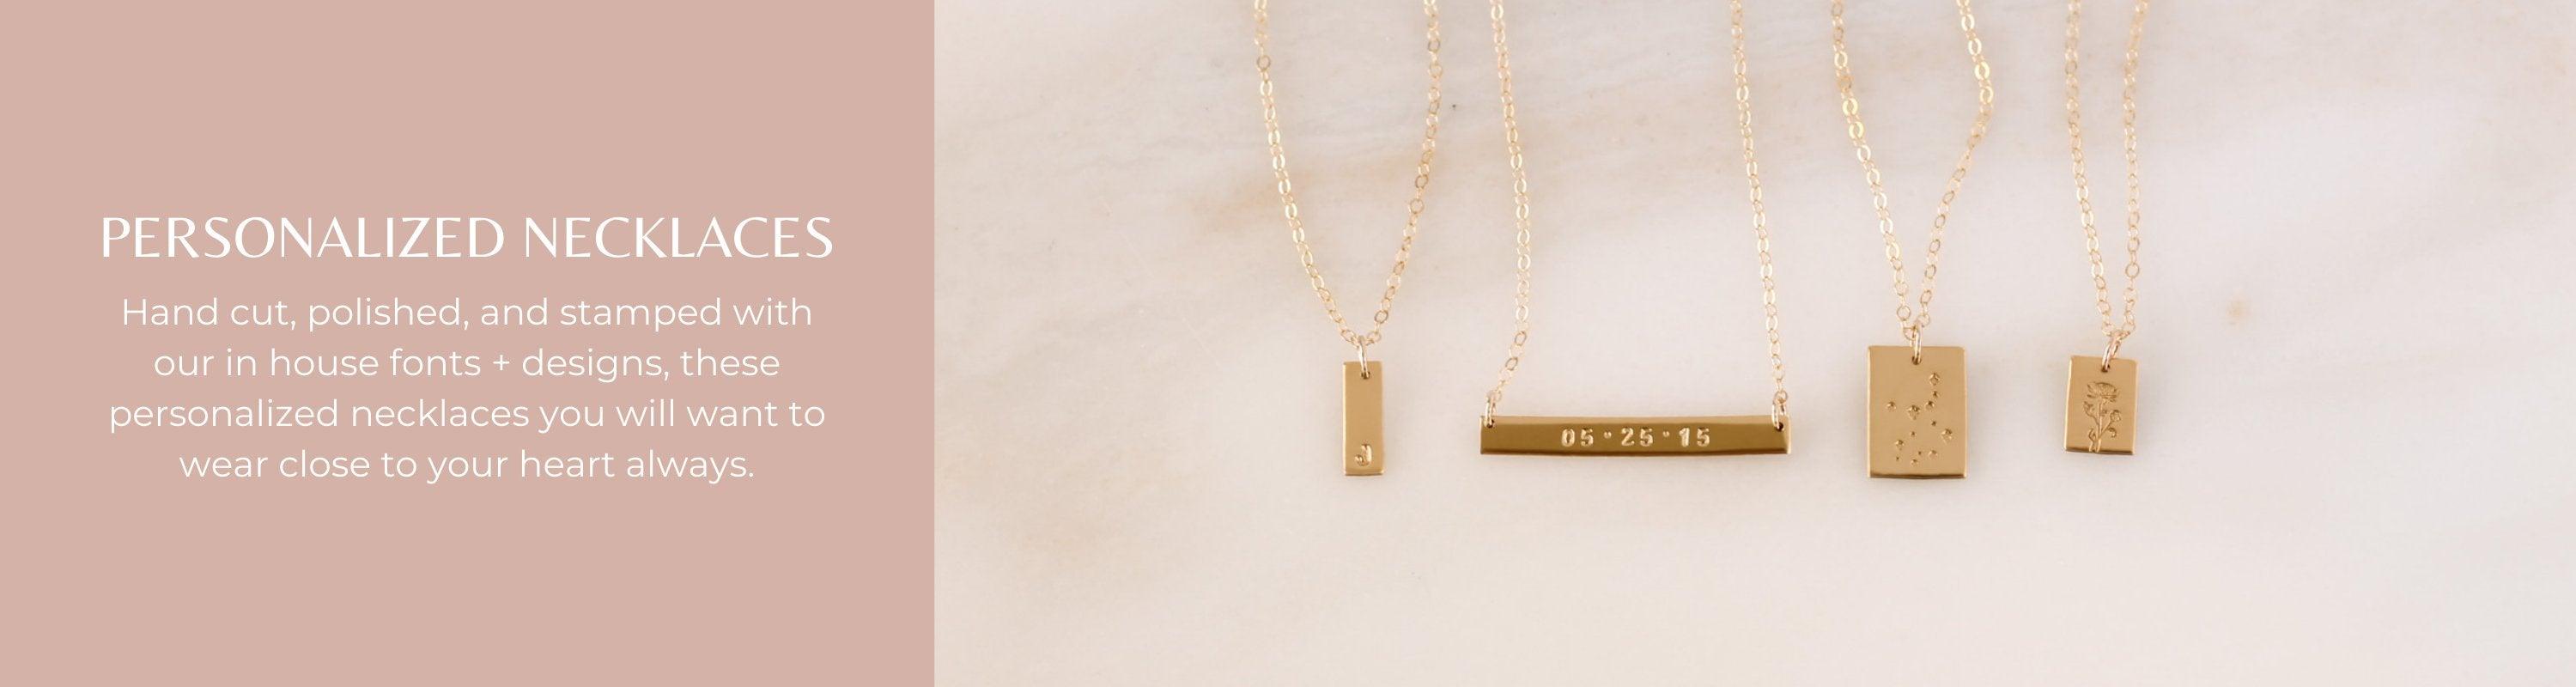 Personalized Necklaces - Nolia Jewelry - Meaningful + Sustainably Handcrafted Jewelry